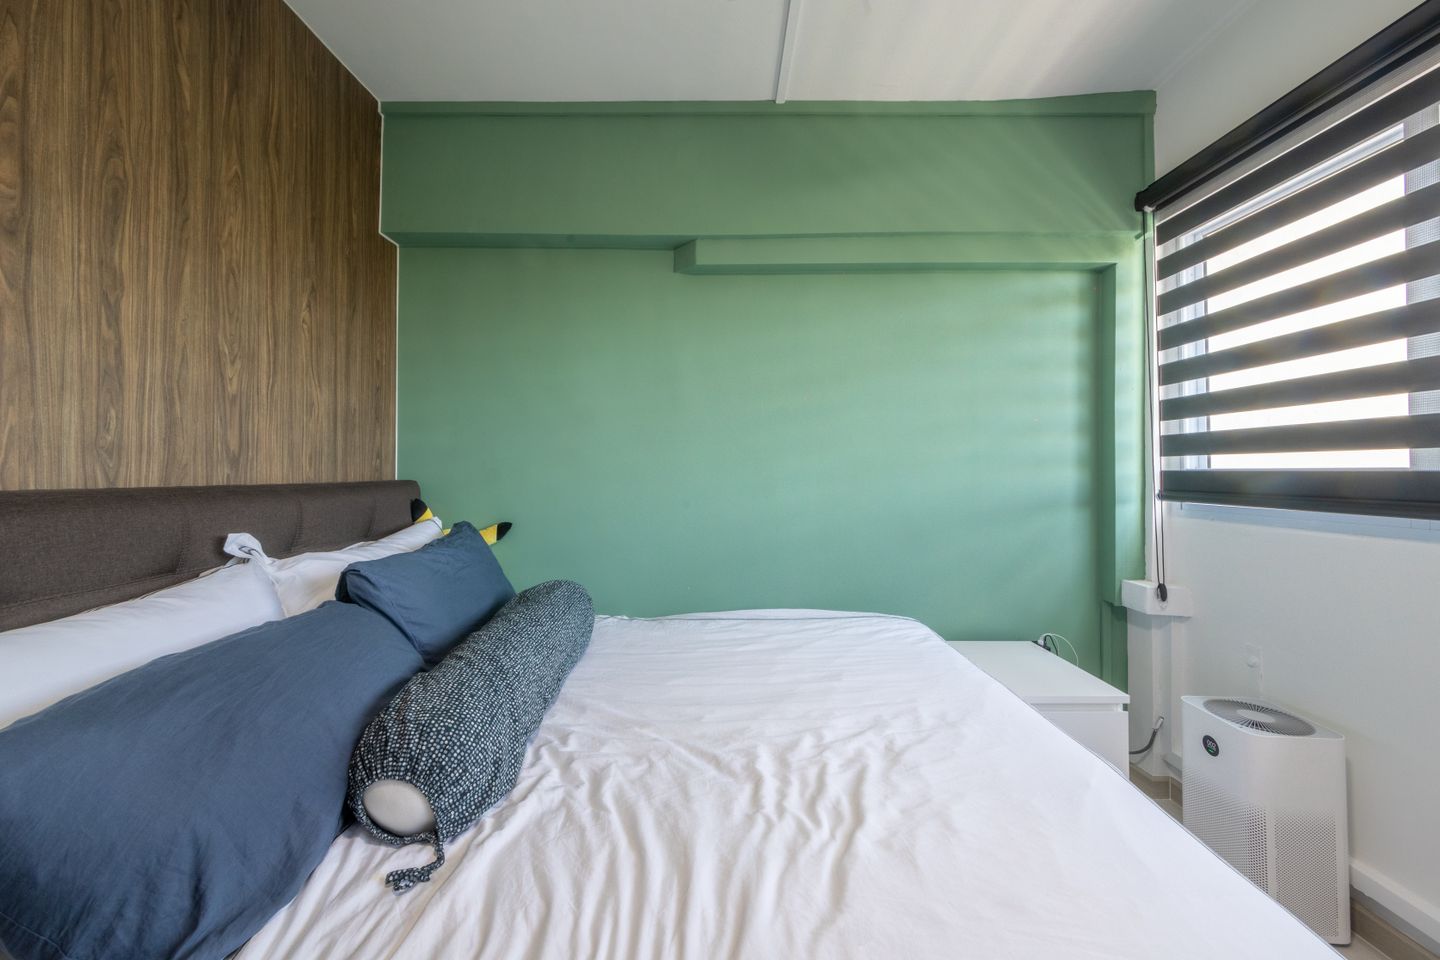 Minimalist Interior Design With Sea Green Wall And Cosy Double Bed